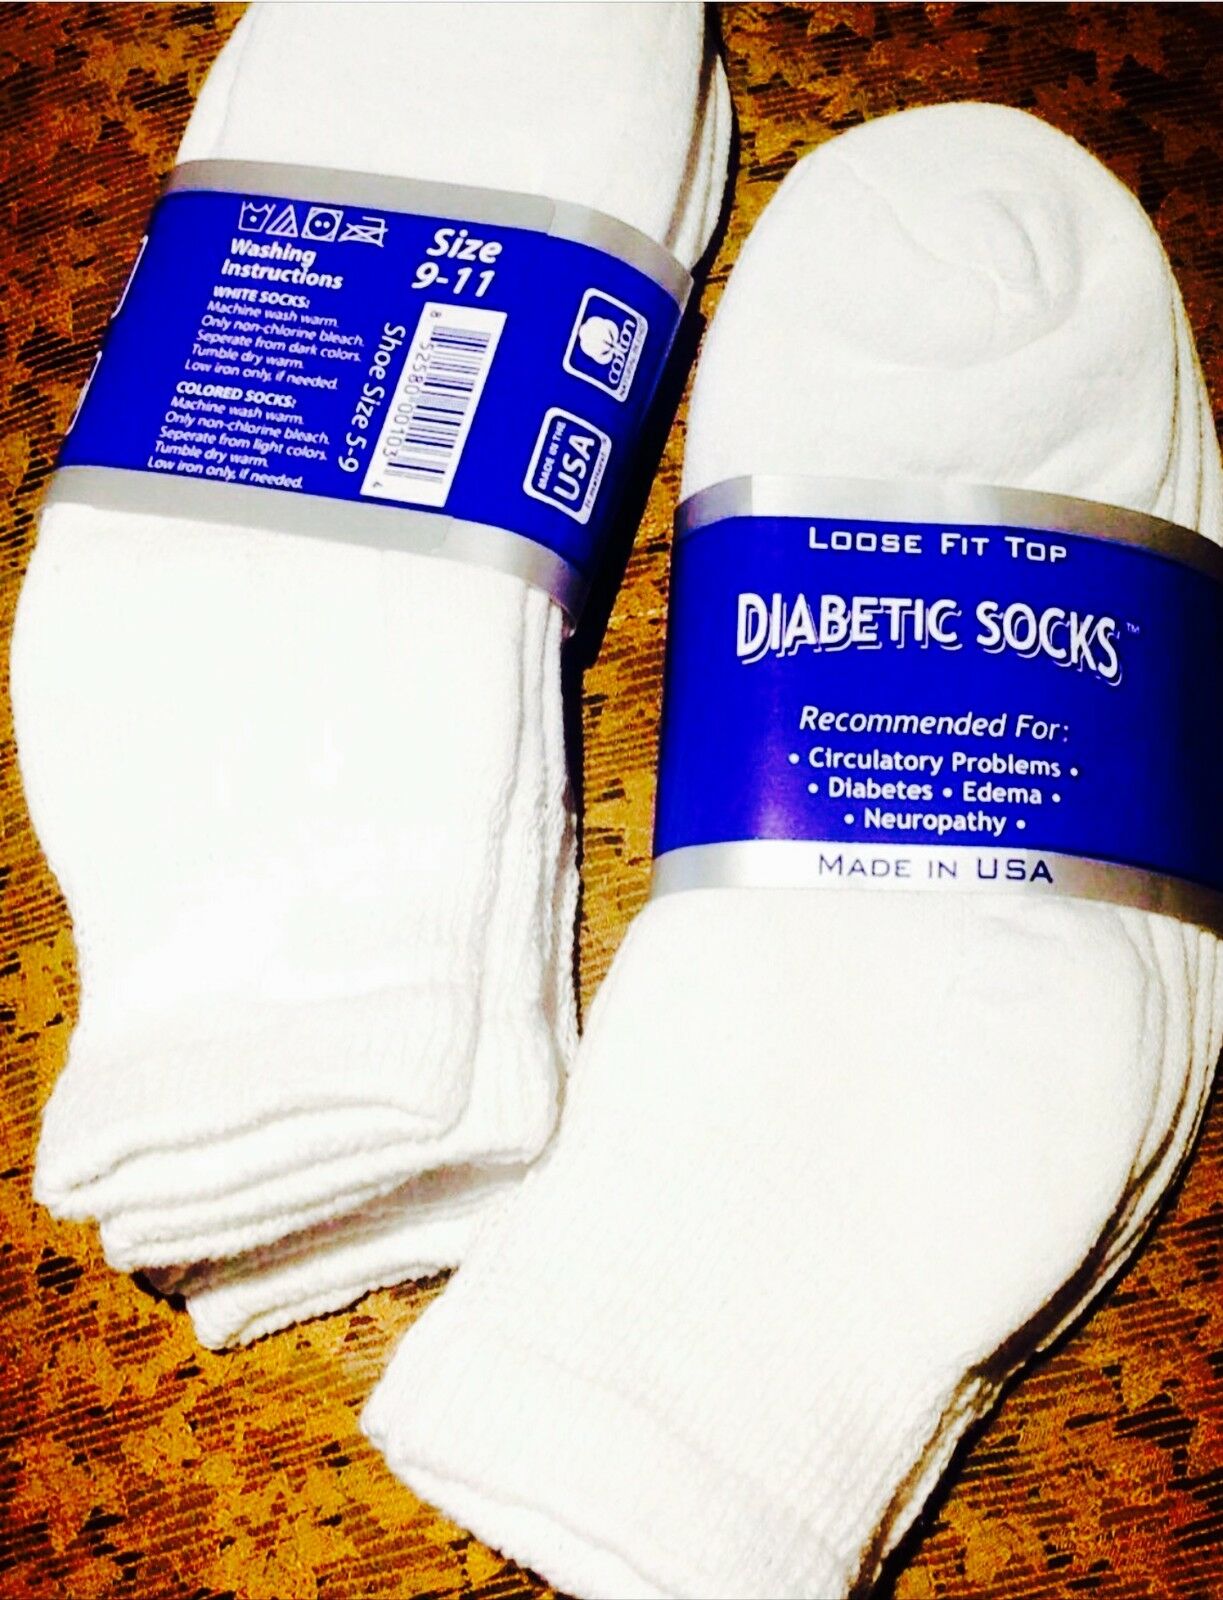 6 Pair Womens Size 9-11 Cotton White Golf Ankle Diabetic Socks Soft Loose Fit